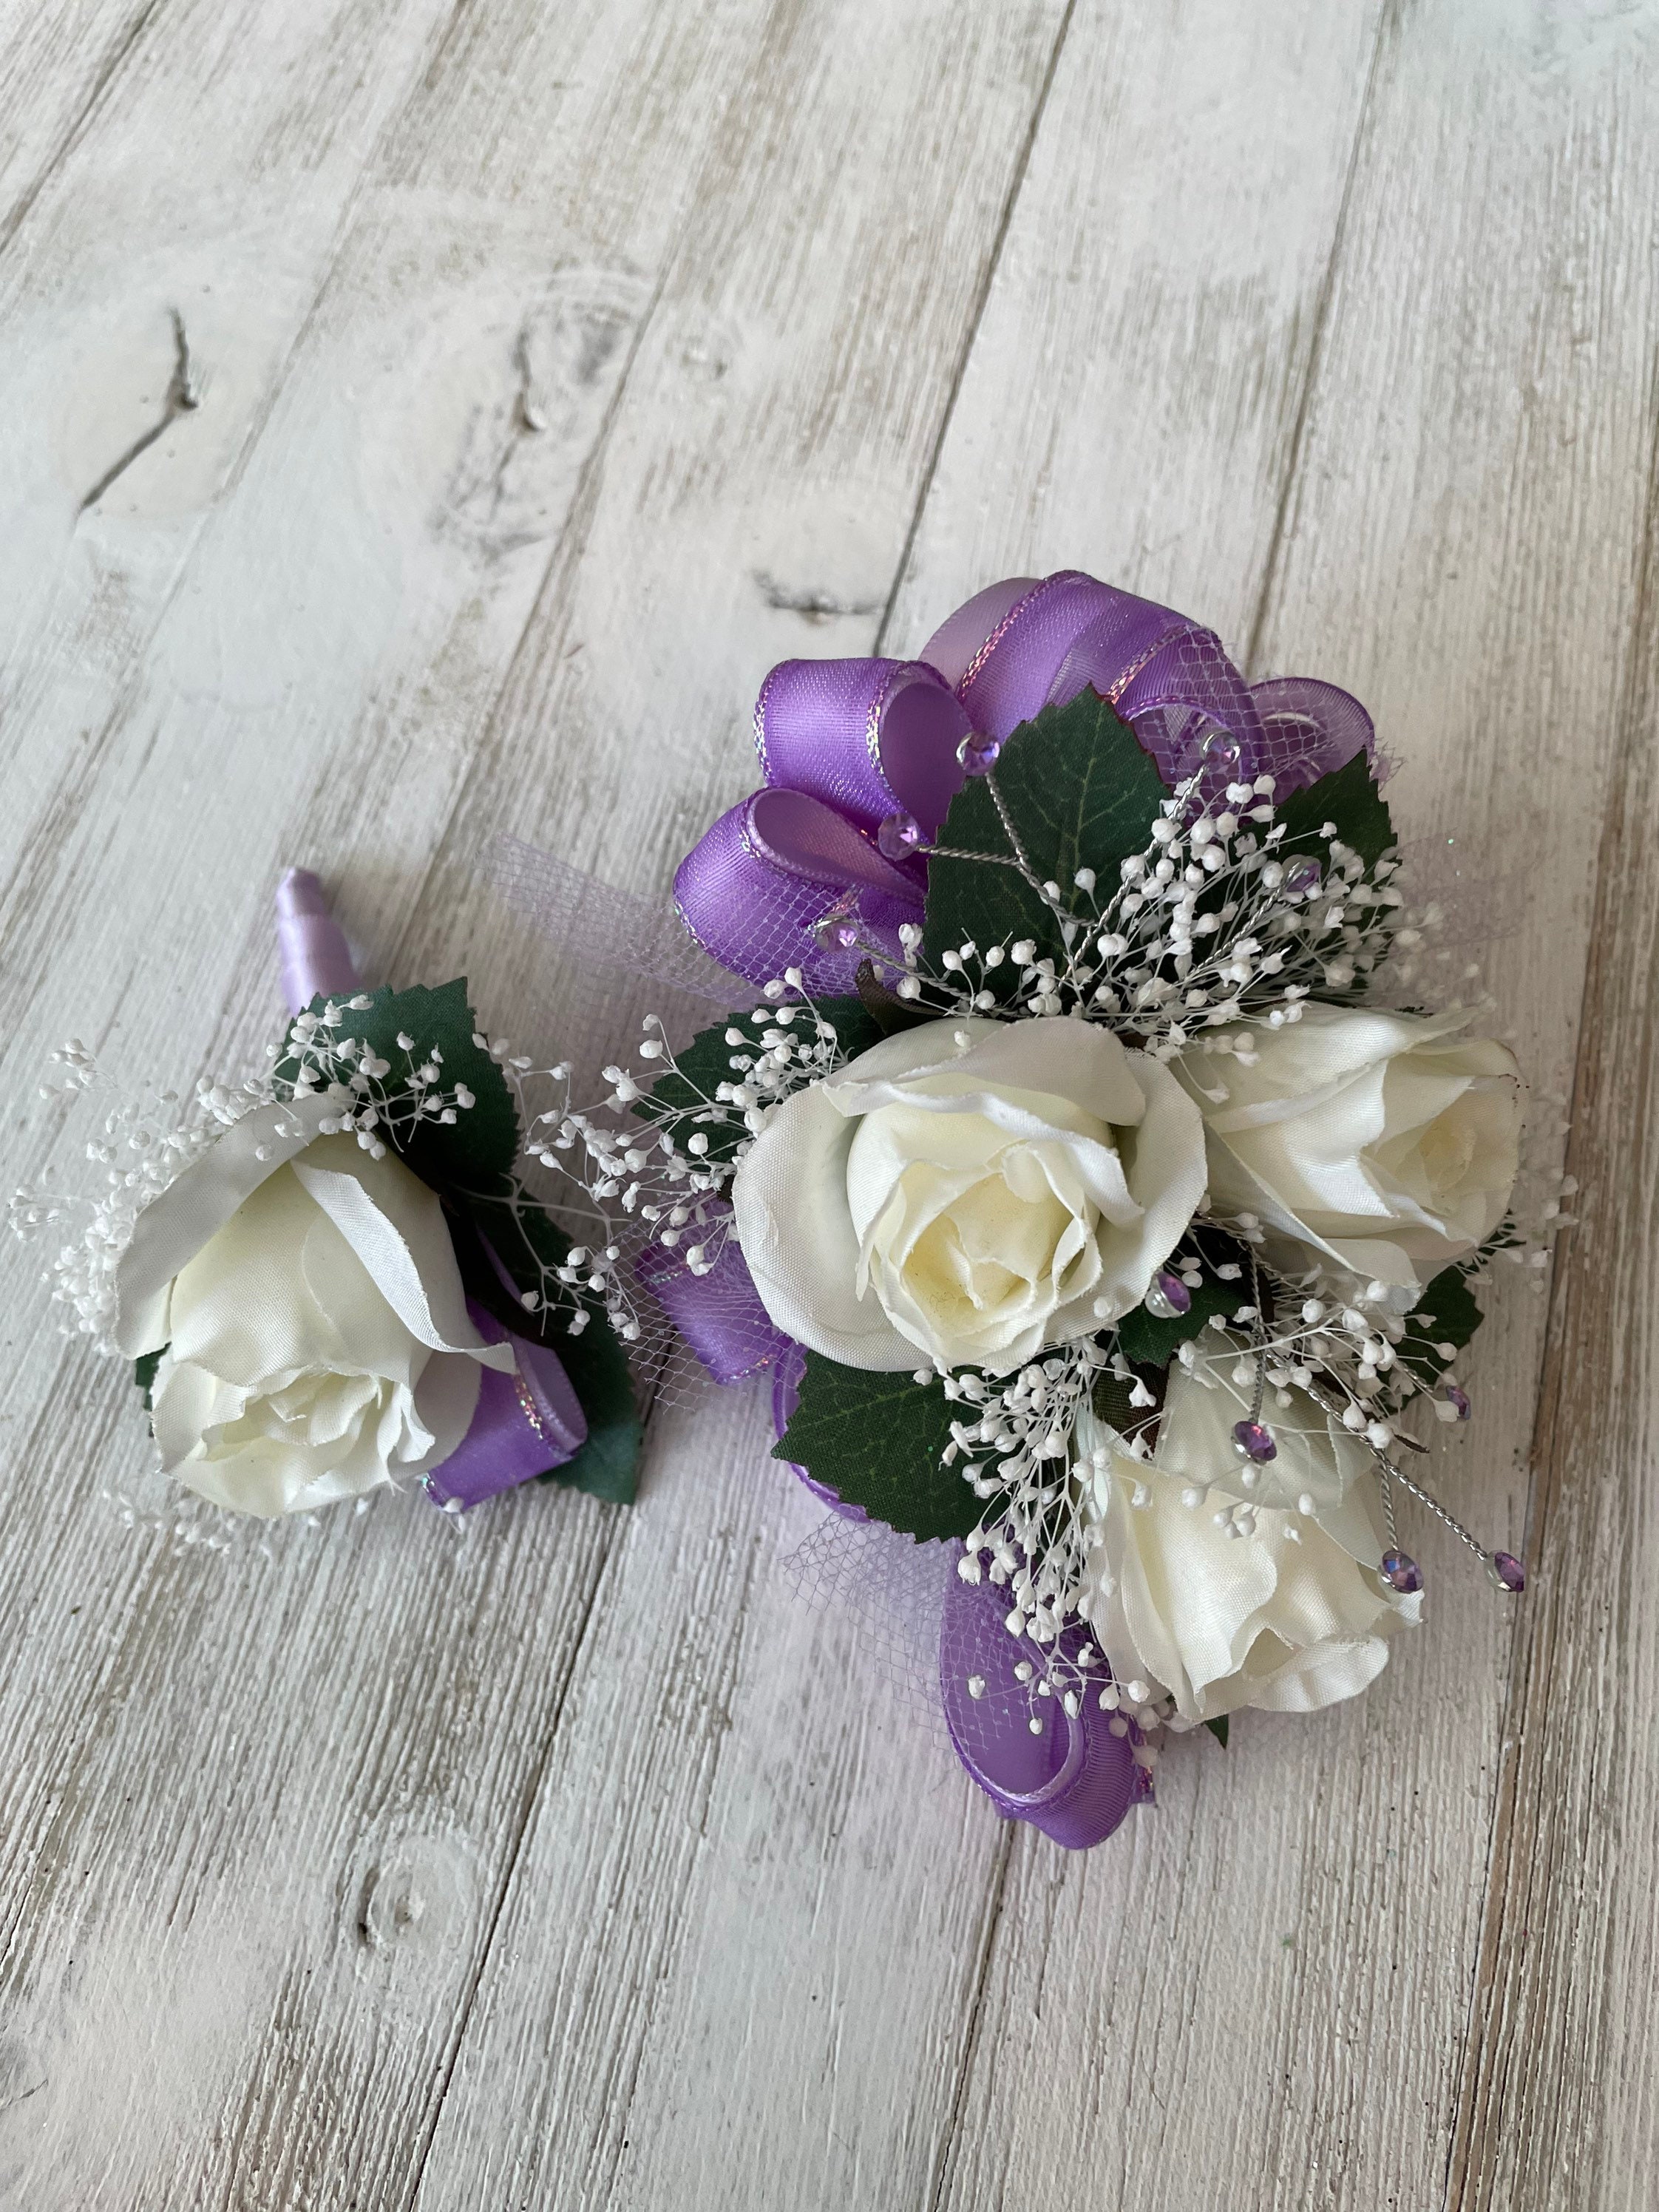 White Sweetheart Rose Wrist Corsage By Carithers Flowers